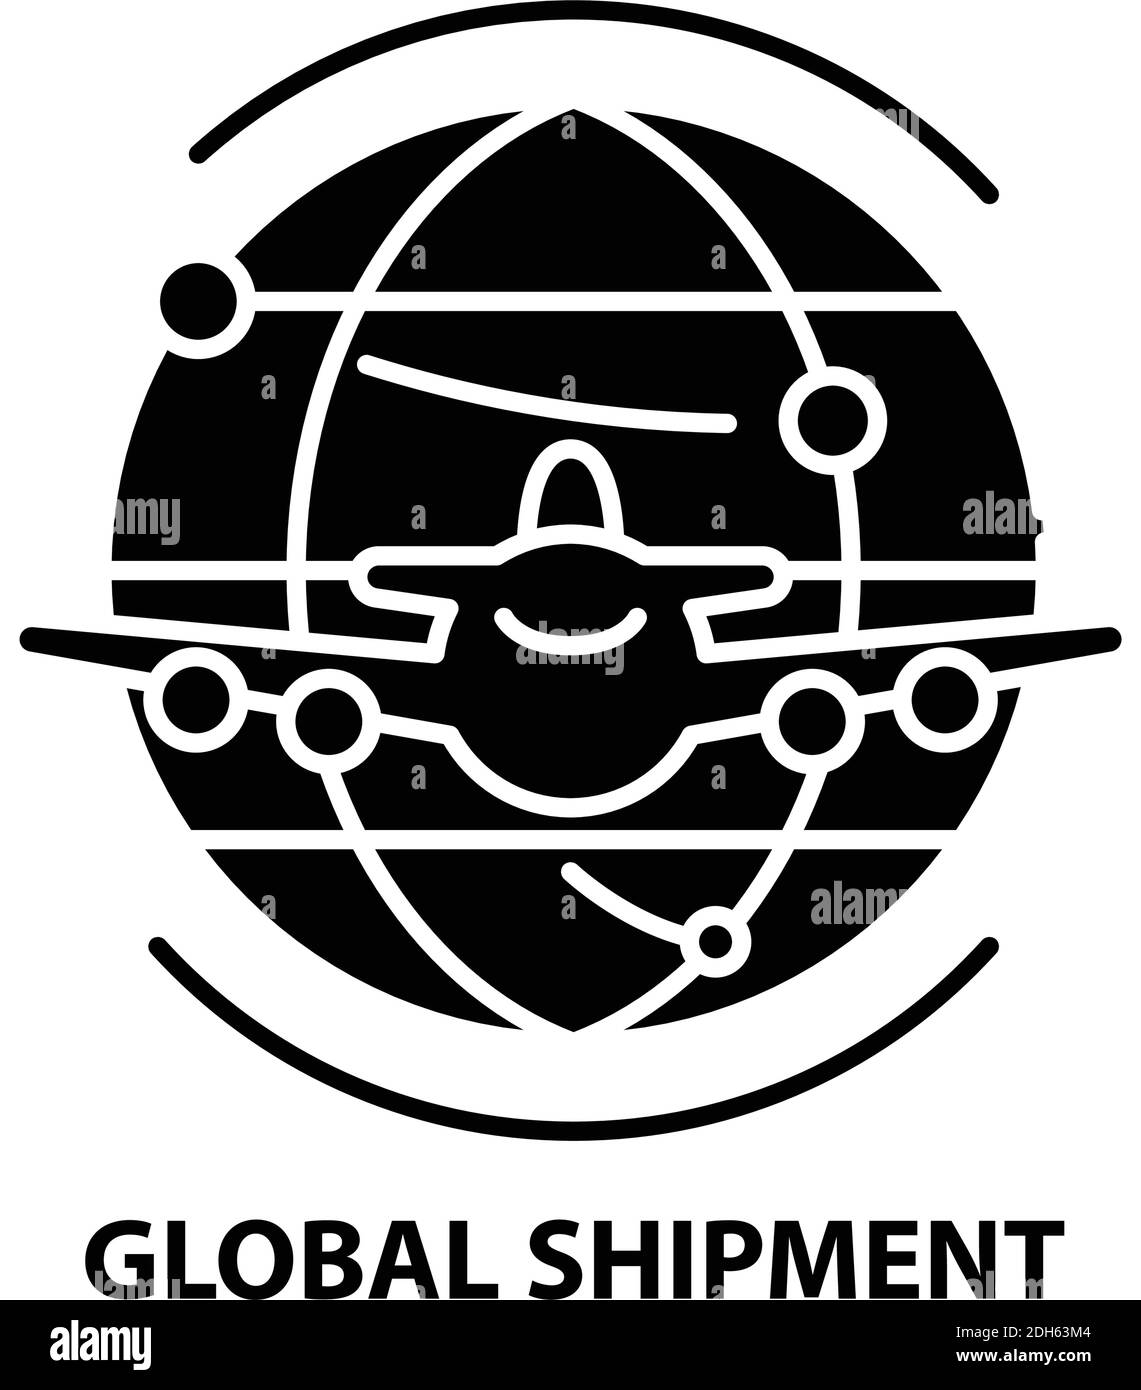 global shipment icon, black vector sign with editable strokes, concept illustration Stock Vector